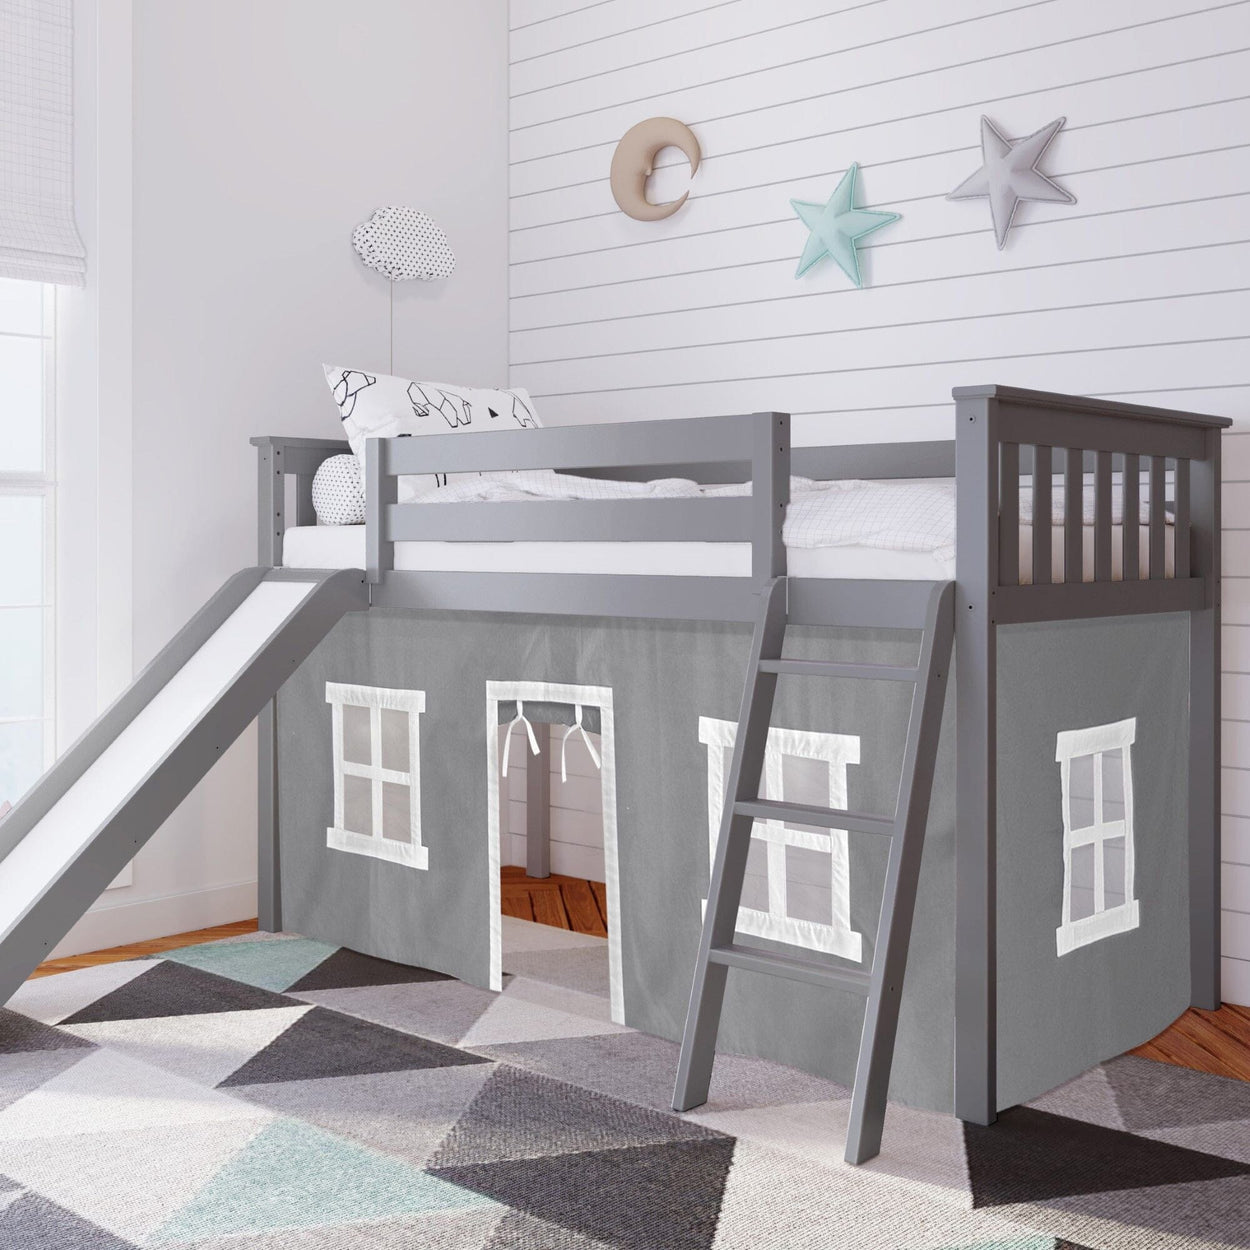 180213121054 : Loft Beds Twin-Size Low Loft with Slide with Curtain, Grey + Grey Curtain